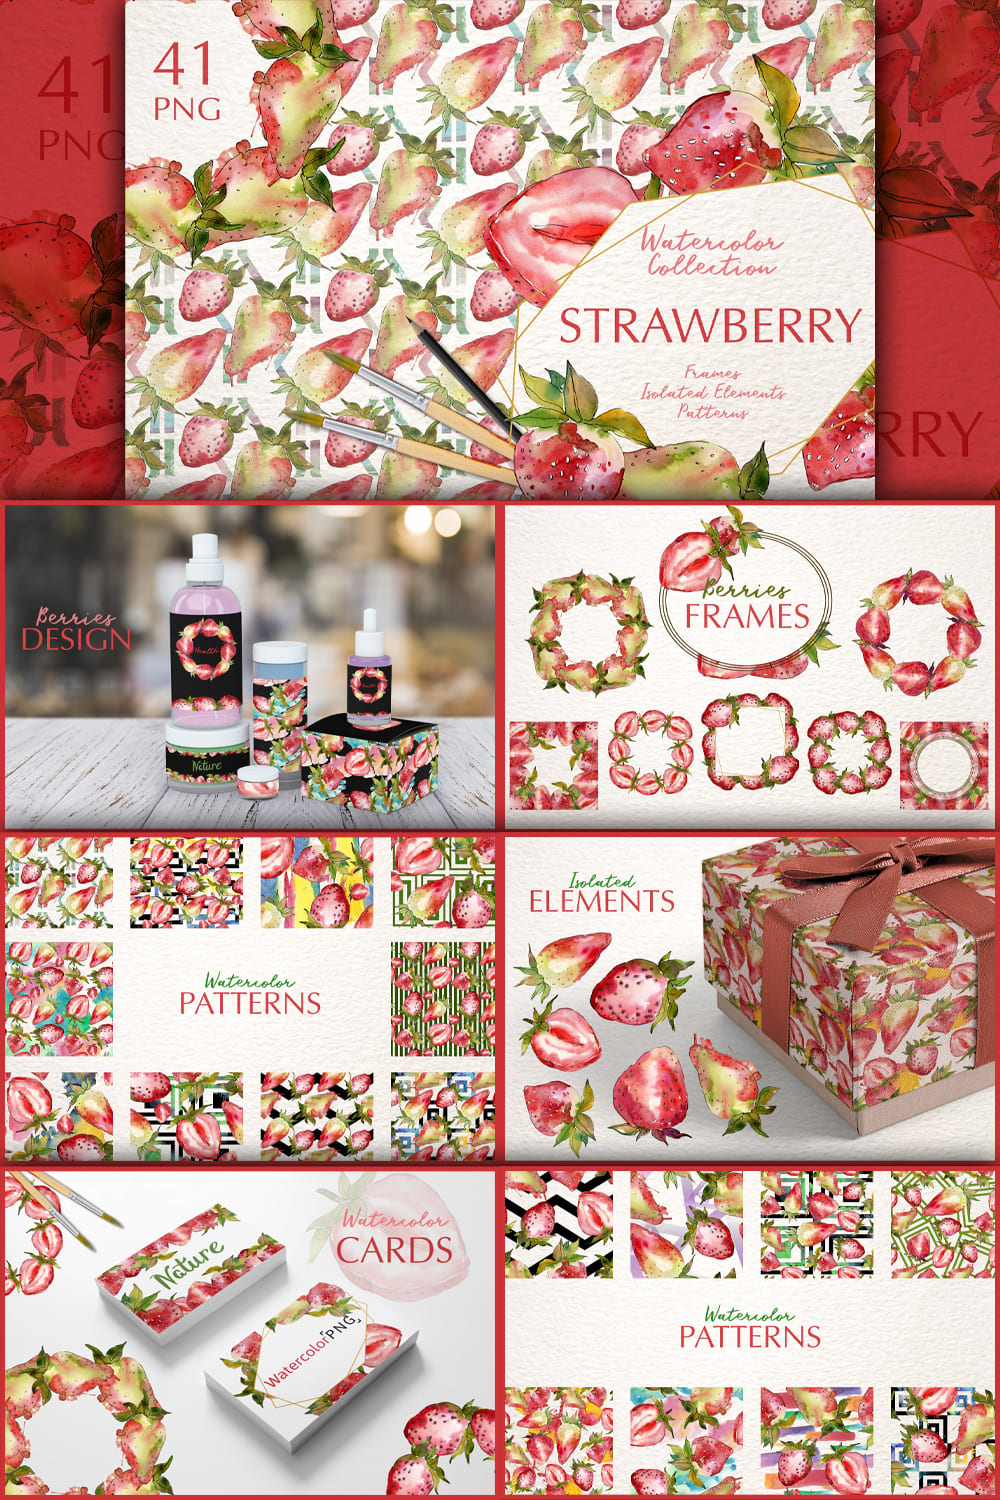 239190 strawberry paradise watercolor png pinterest 1000 1500 38